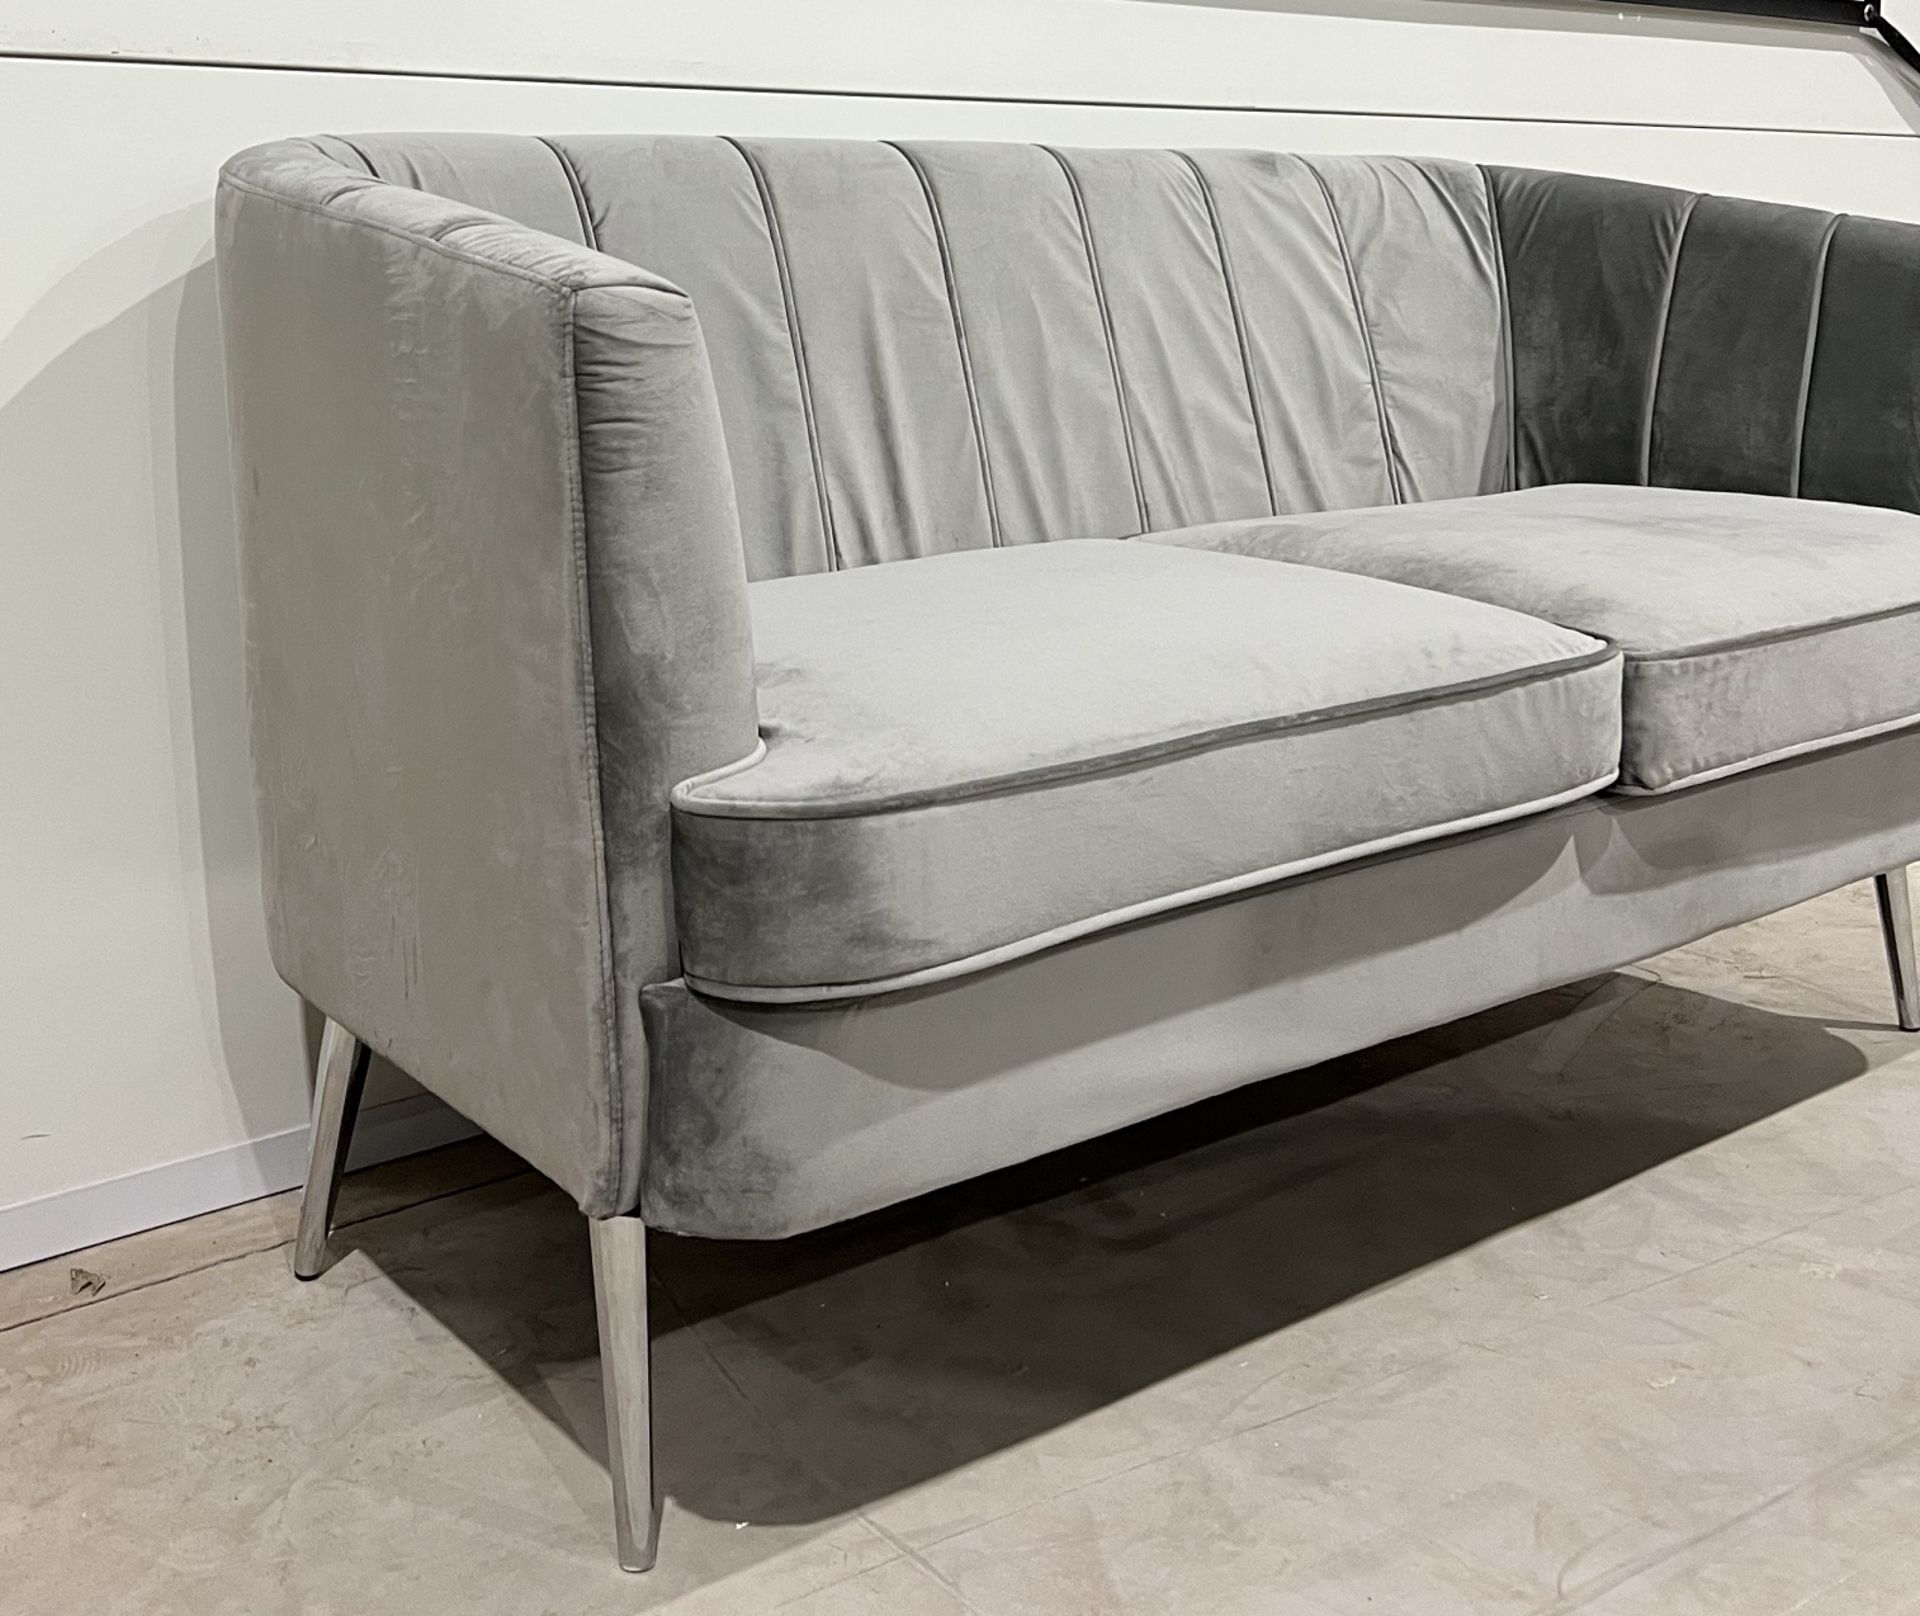 Lulu Sofa In Grey Velvet With Steel Silver Metal Legs Reminiscent Of An Exotic Seashell. - Image 3 of 3